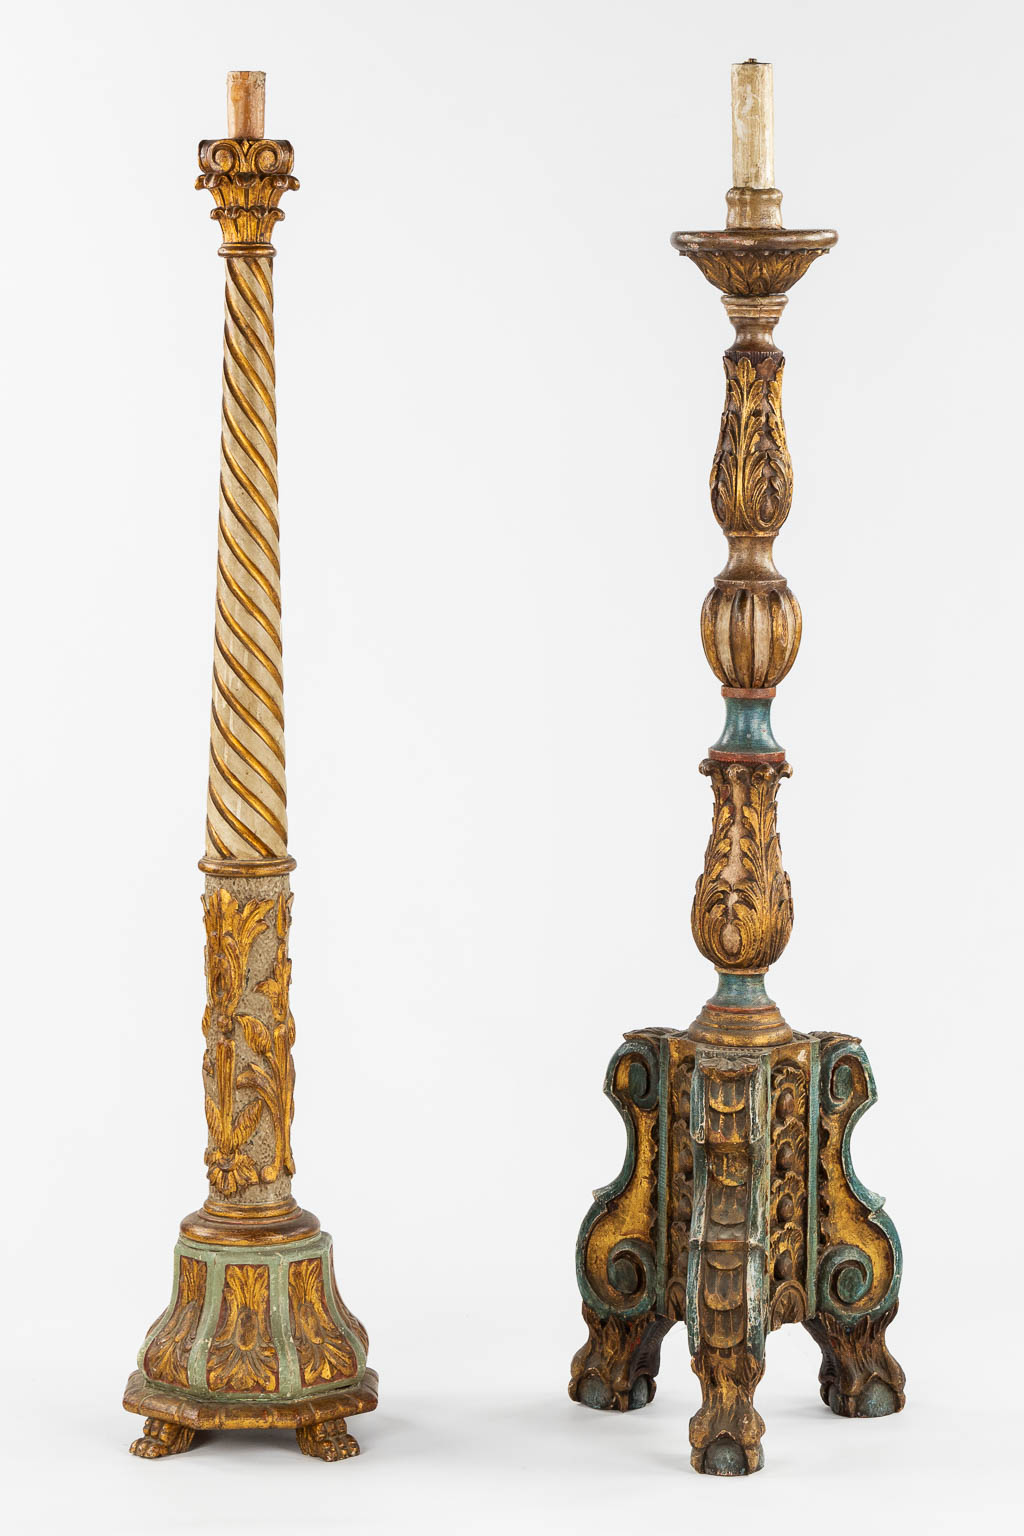 A pair of standing lamps, sculptured and patinated wood. Circa 1900. (H:144 cm)